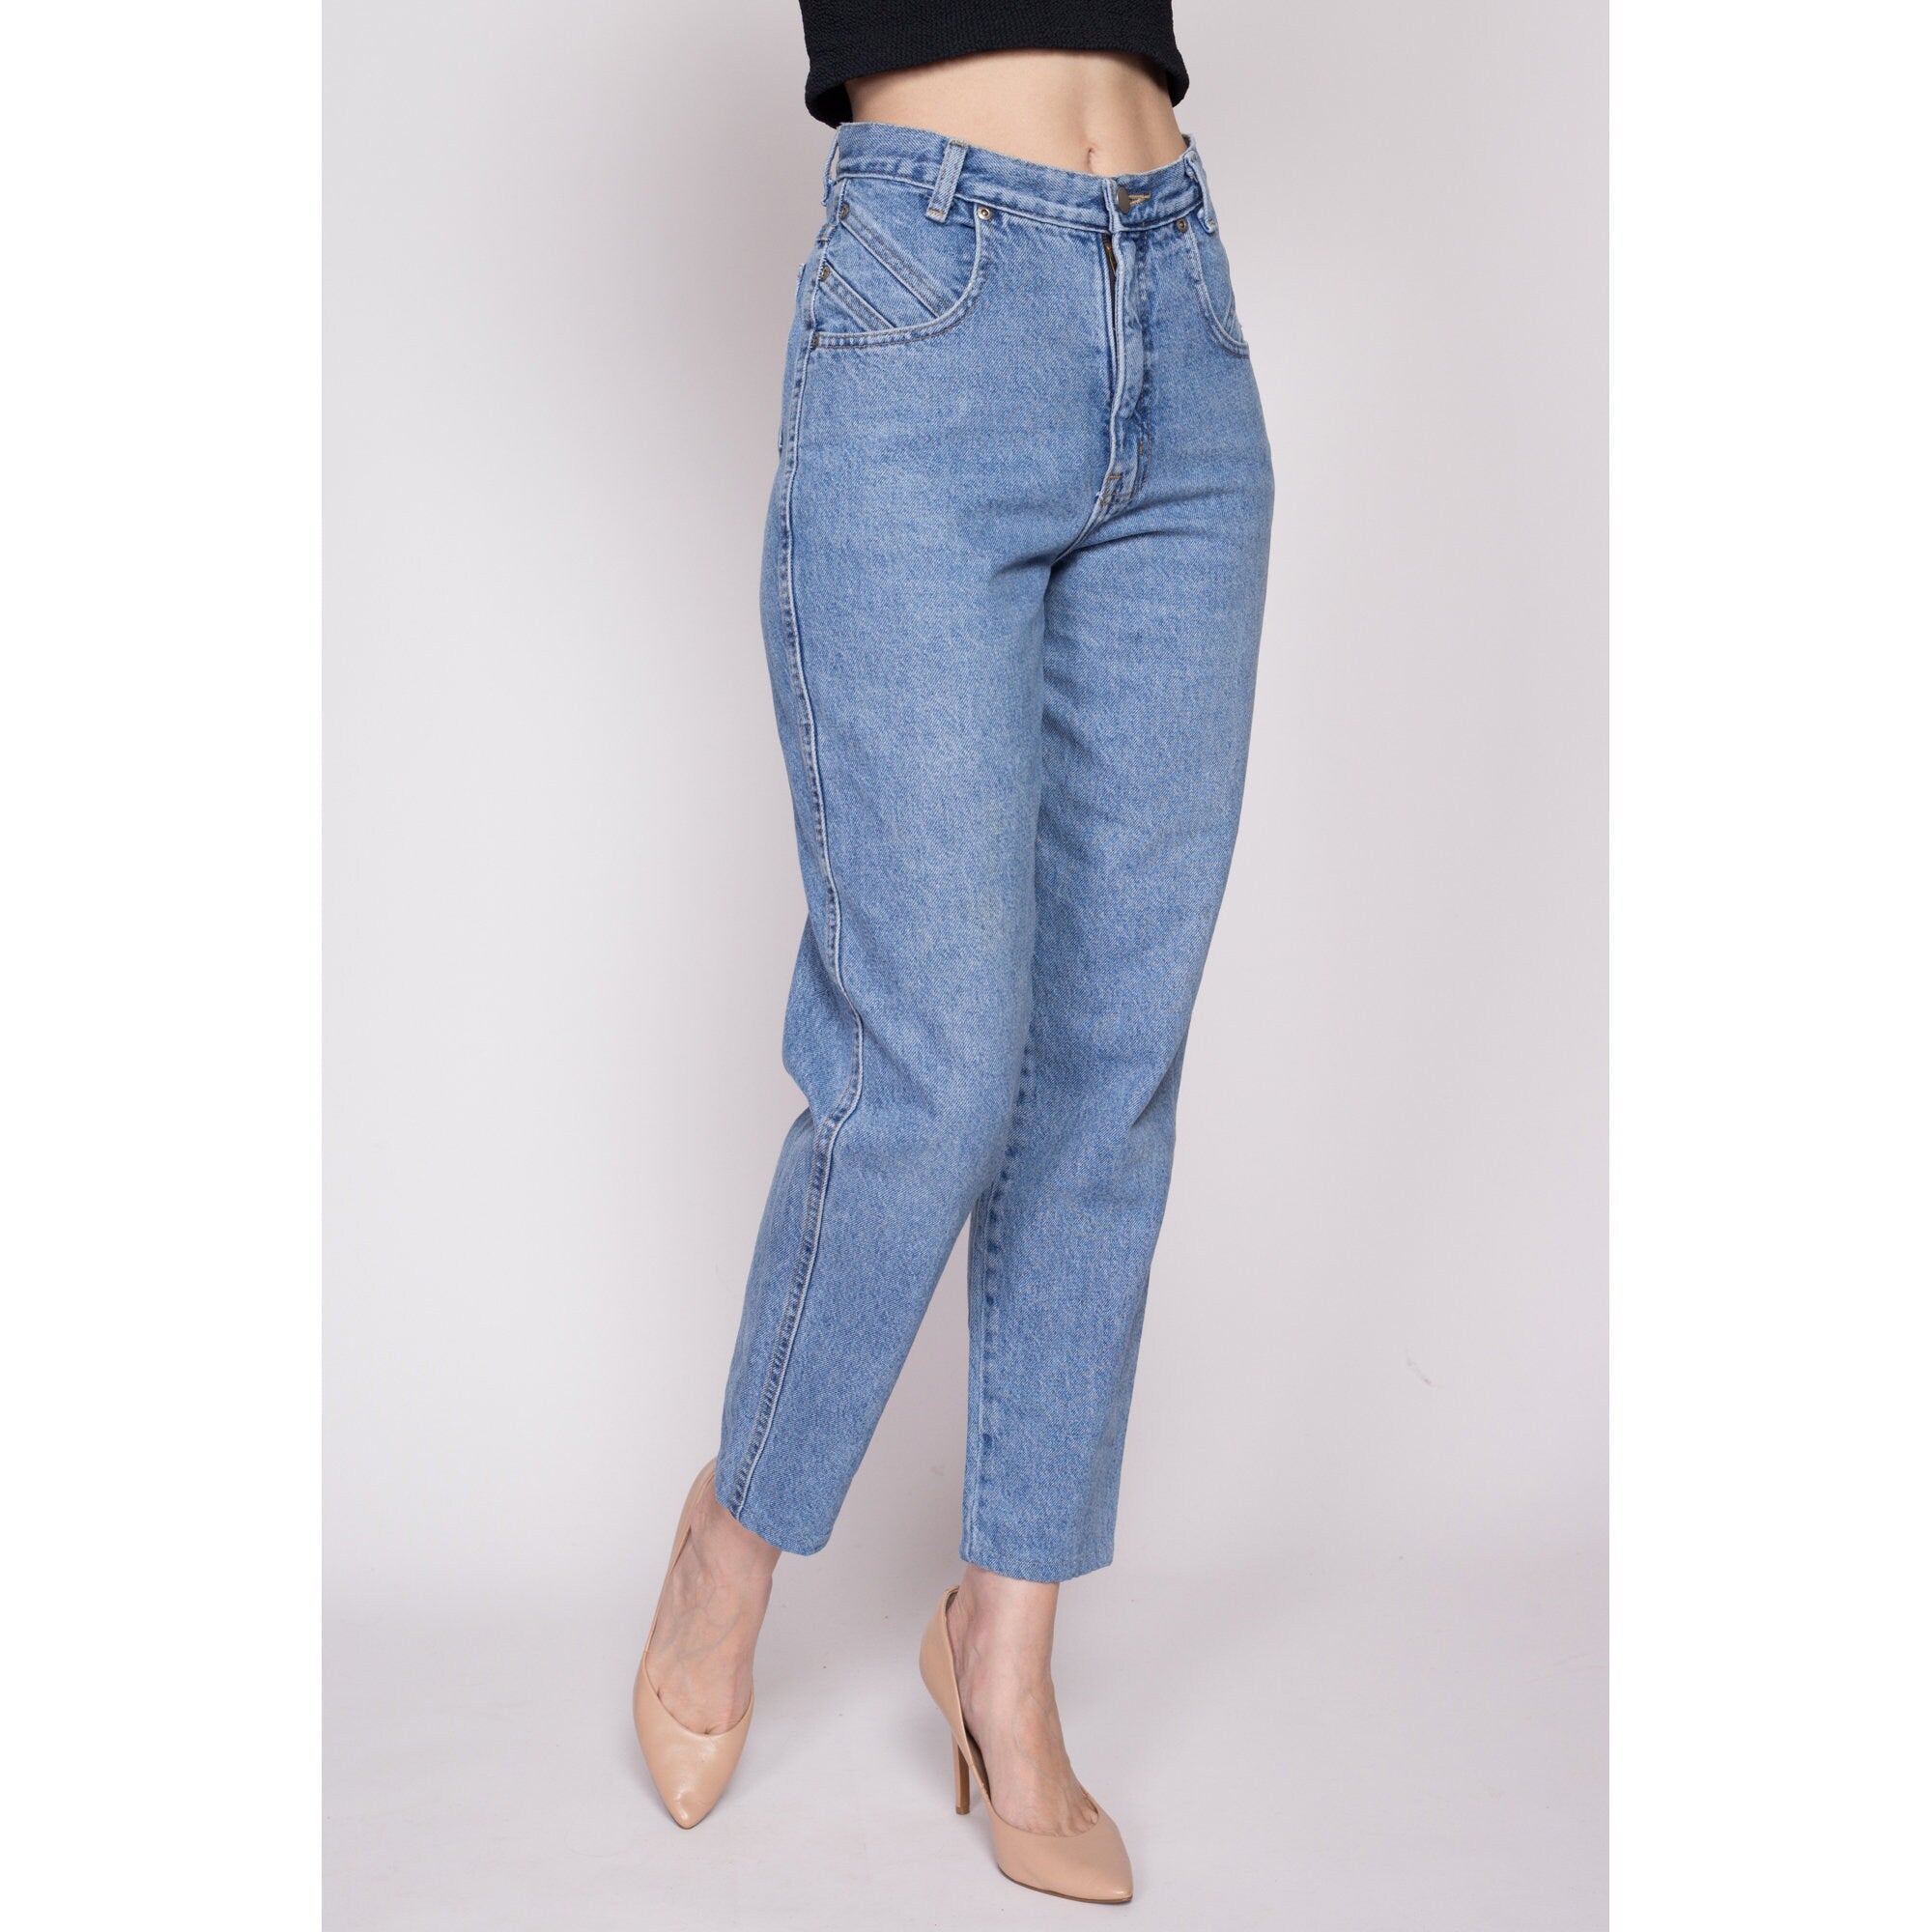 Top more than 98 aesthetic mom jeans